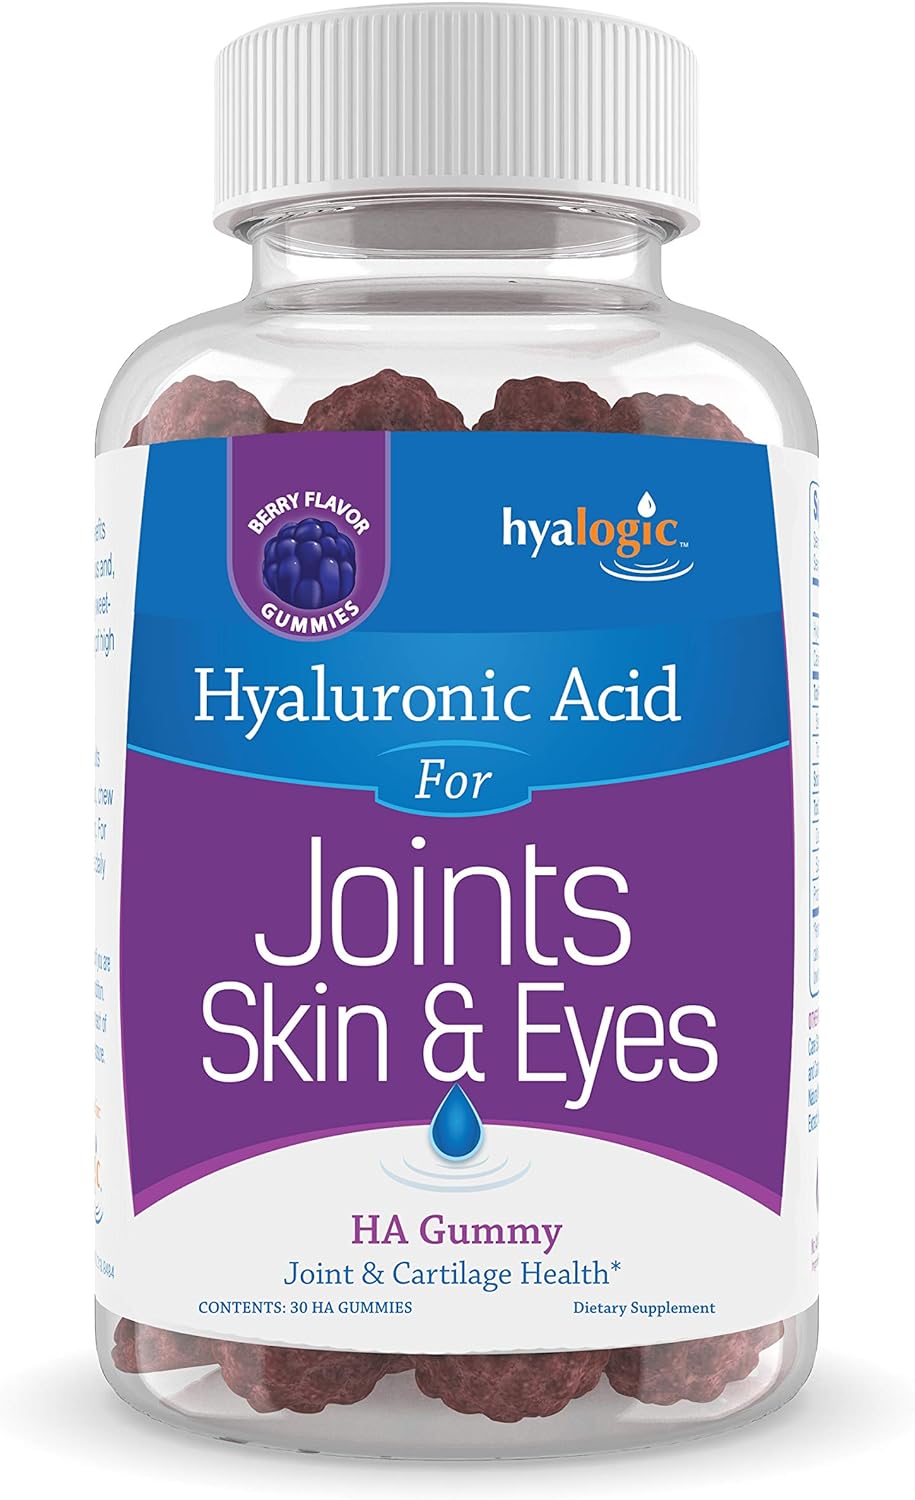 Hyalogic Hyaluronic Acid Gummies Mixed Berry Flavor HA Gummies ? Gluten-Free Gummy Vitamins for Adults - HA Supplement for Joints, Skin & Eyes (30 Count)